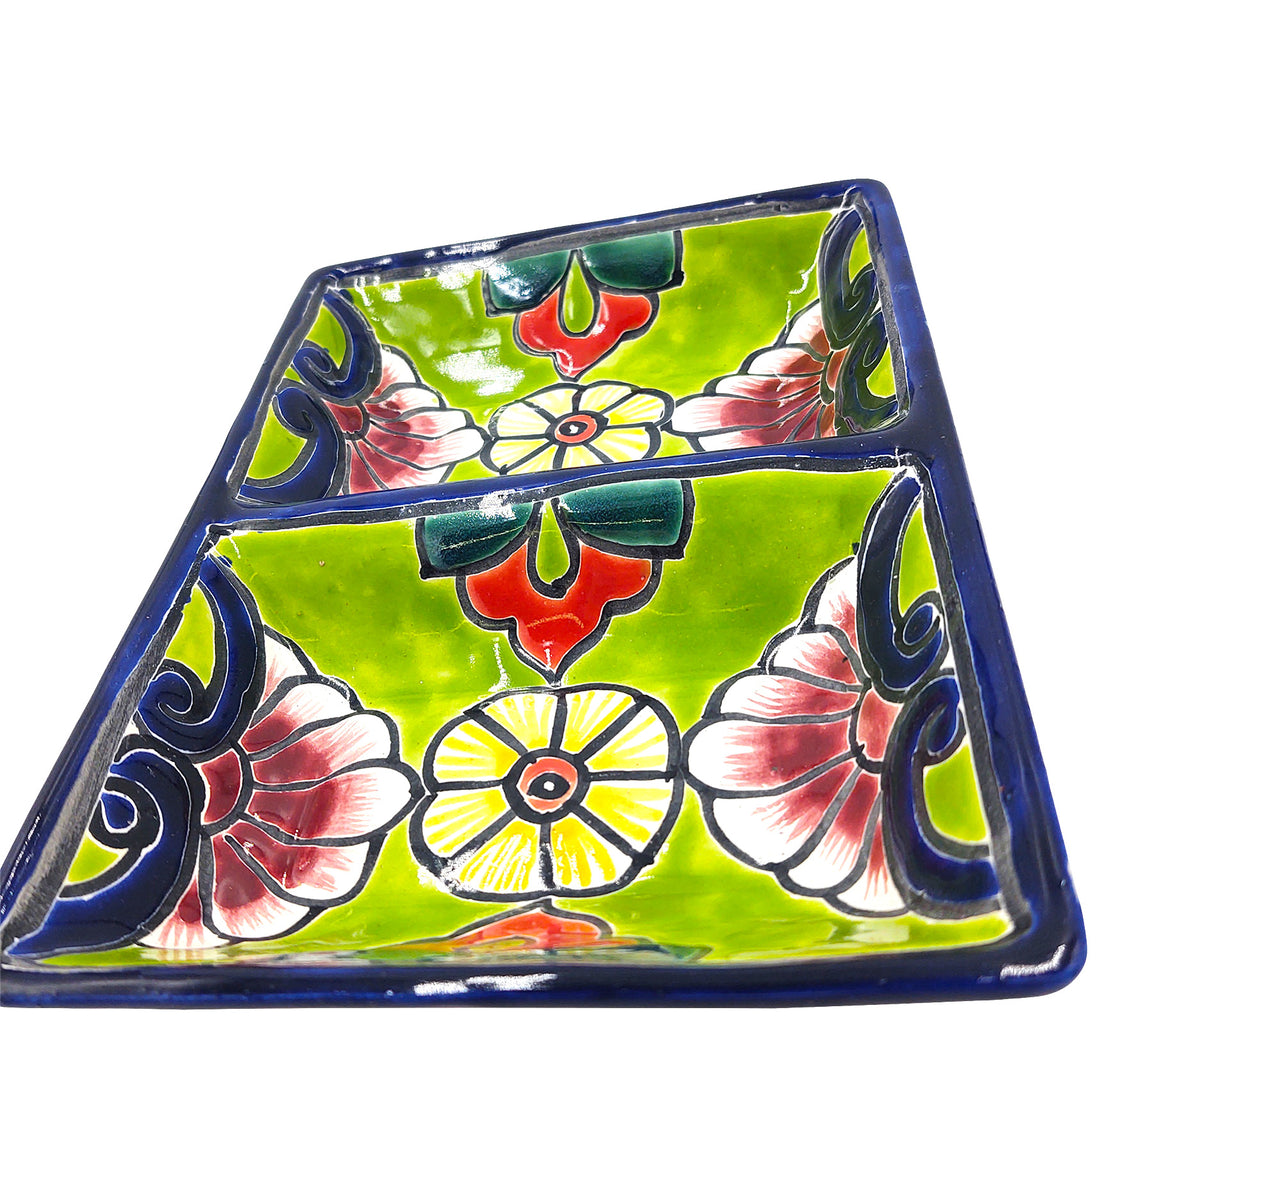 Mexican Talavera Ceramic Divided Serving Dish - Dual Section, 10" Tableware Authentic Décor for Dining & Entertaining, Hand Painted - Dark Blue Trim